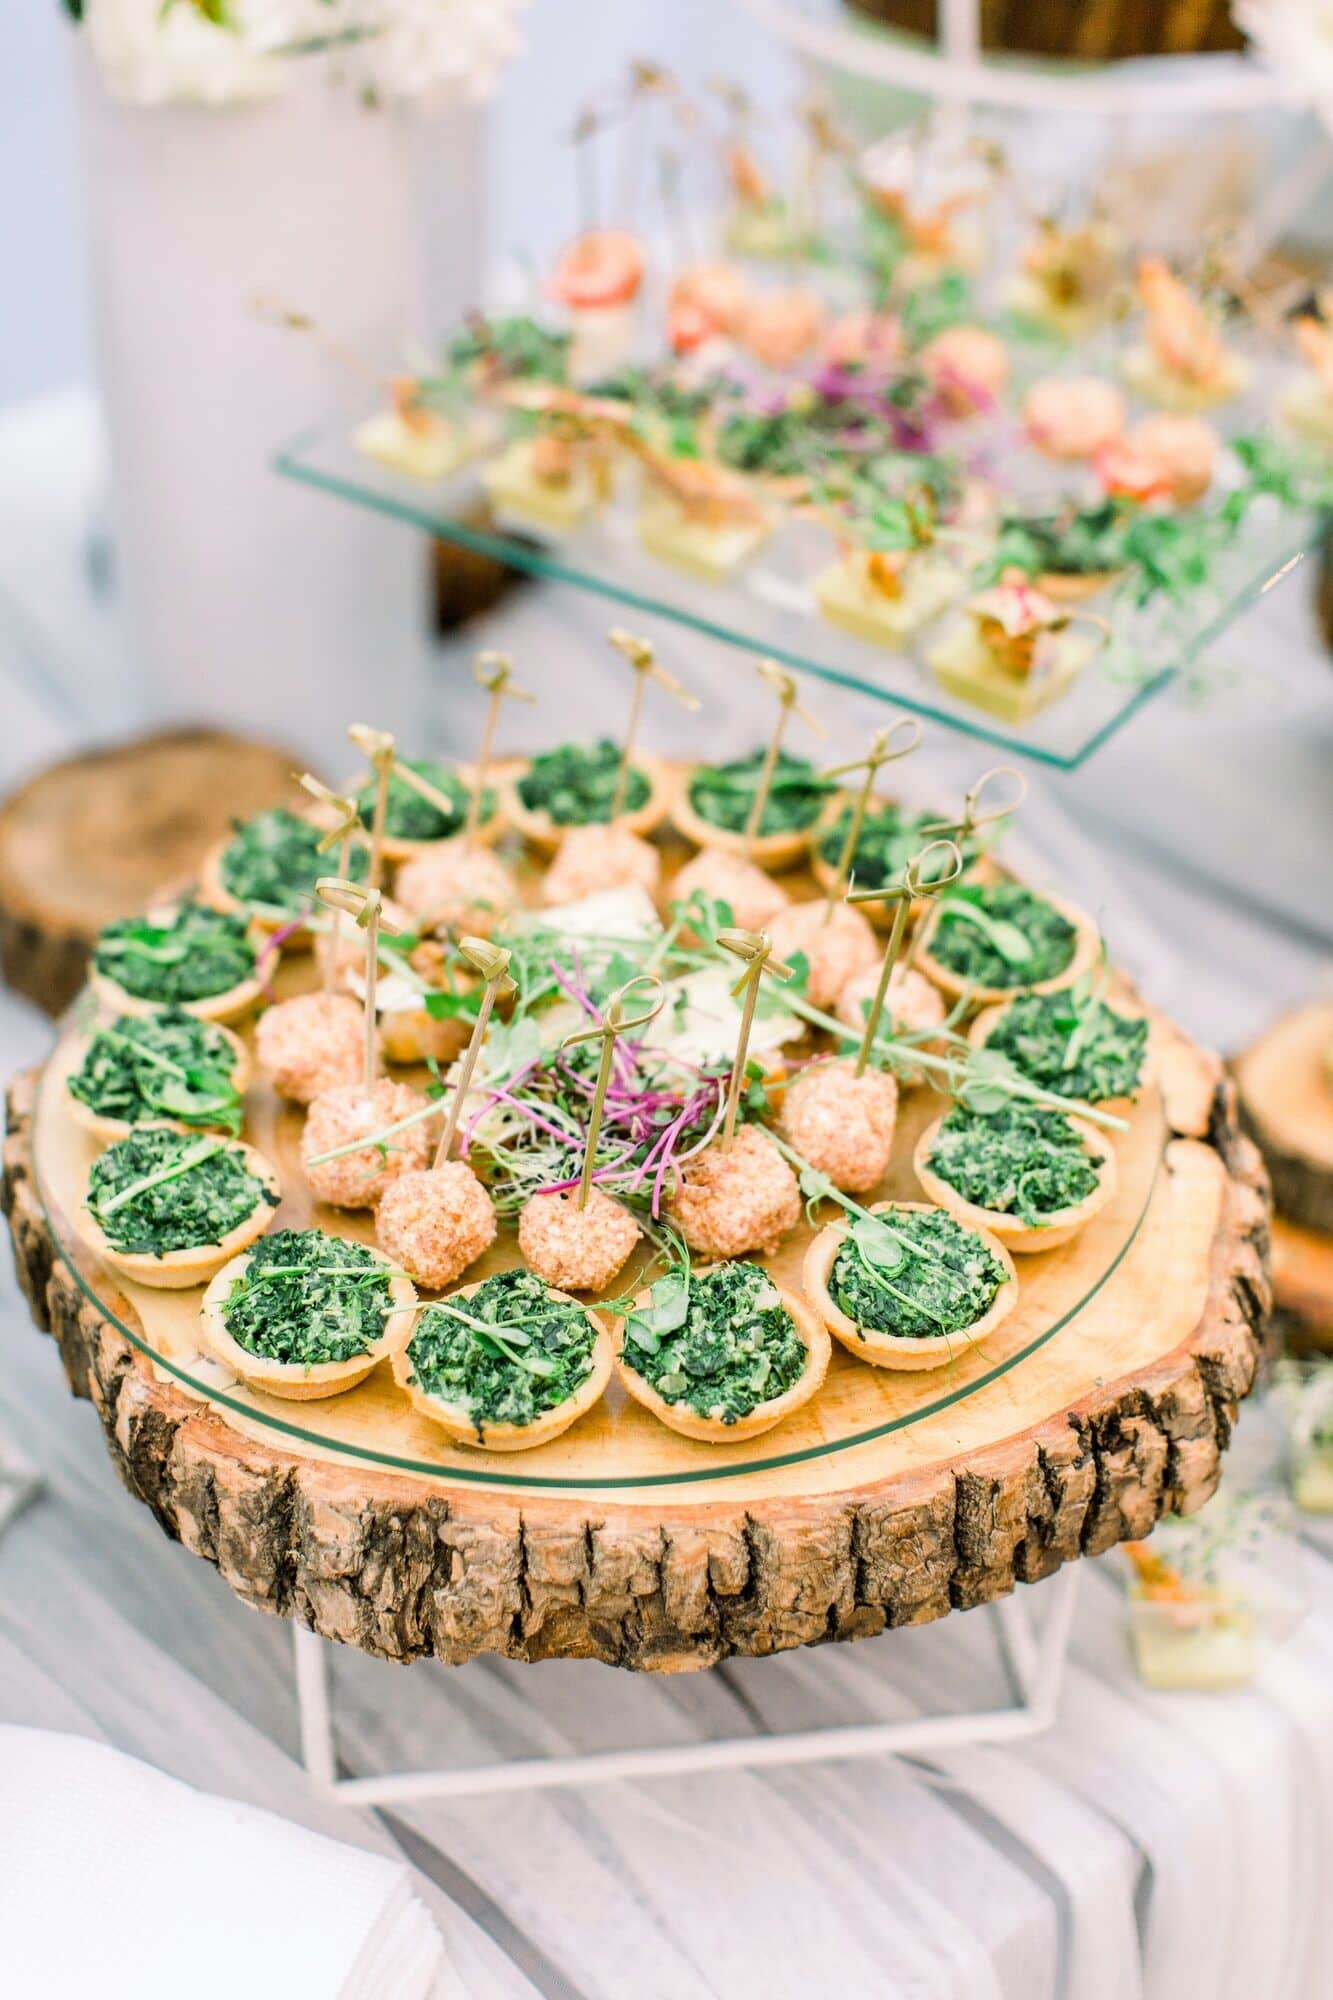 Delicious canapes as event wedding dish. Catering - served table with various snacks, canape and